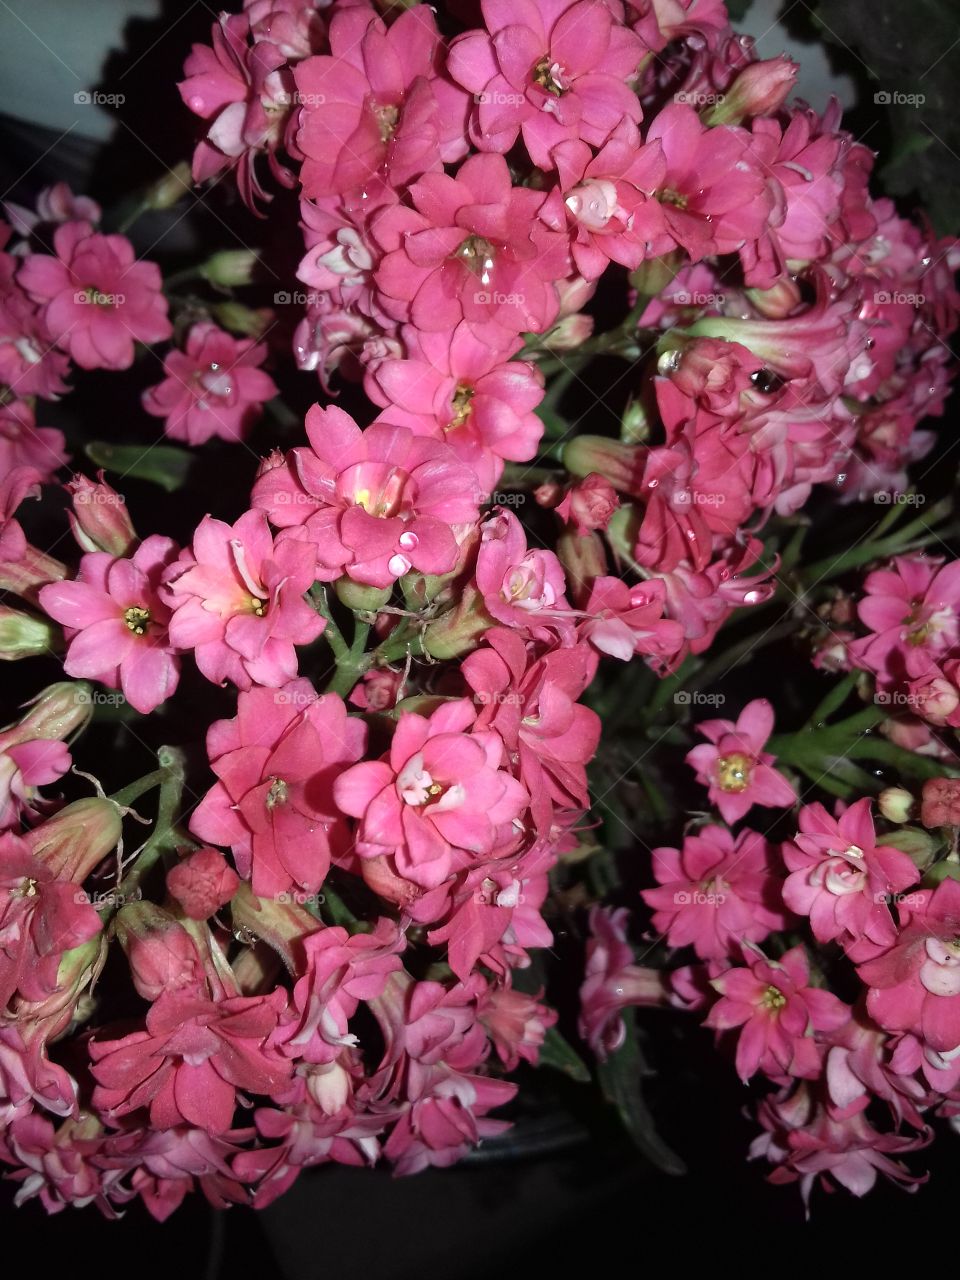 flowers look calm at night here is a pink flower at full blossom